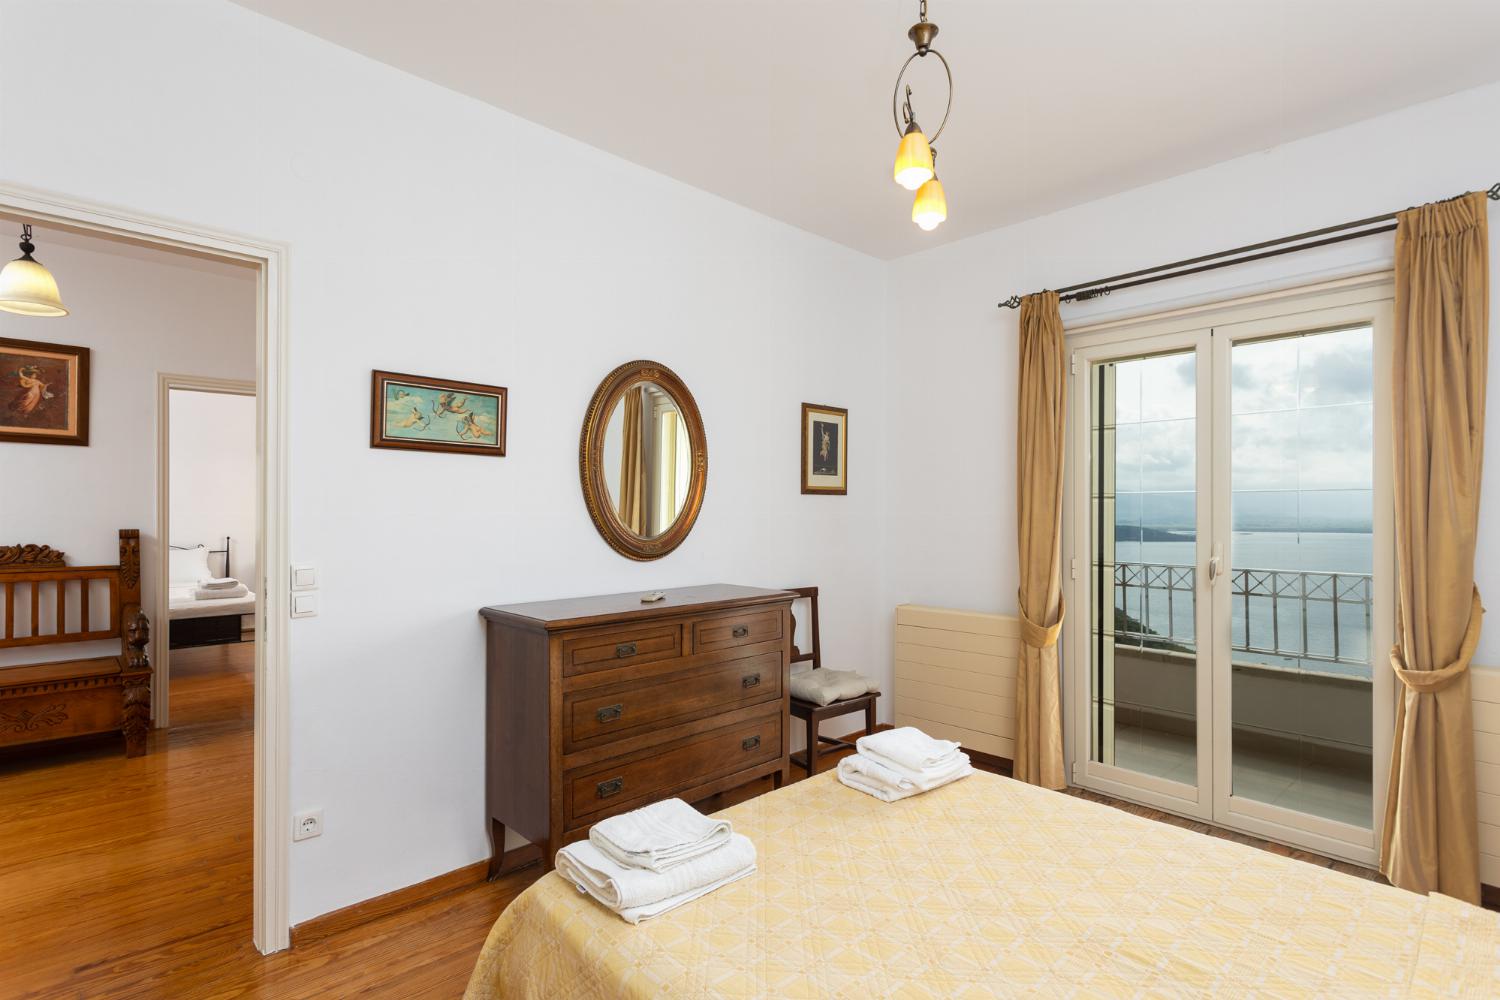 Double bedroom on first floor with A/C, sea views, and balcony access